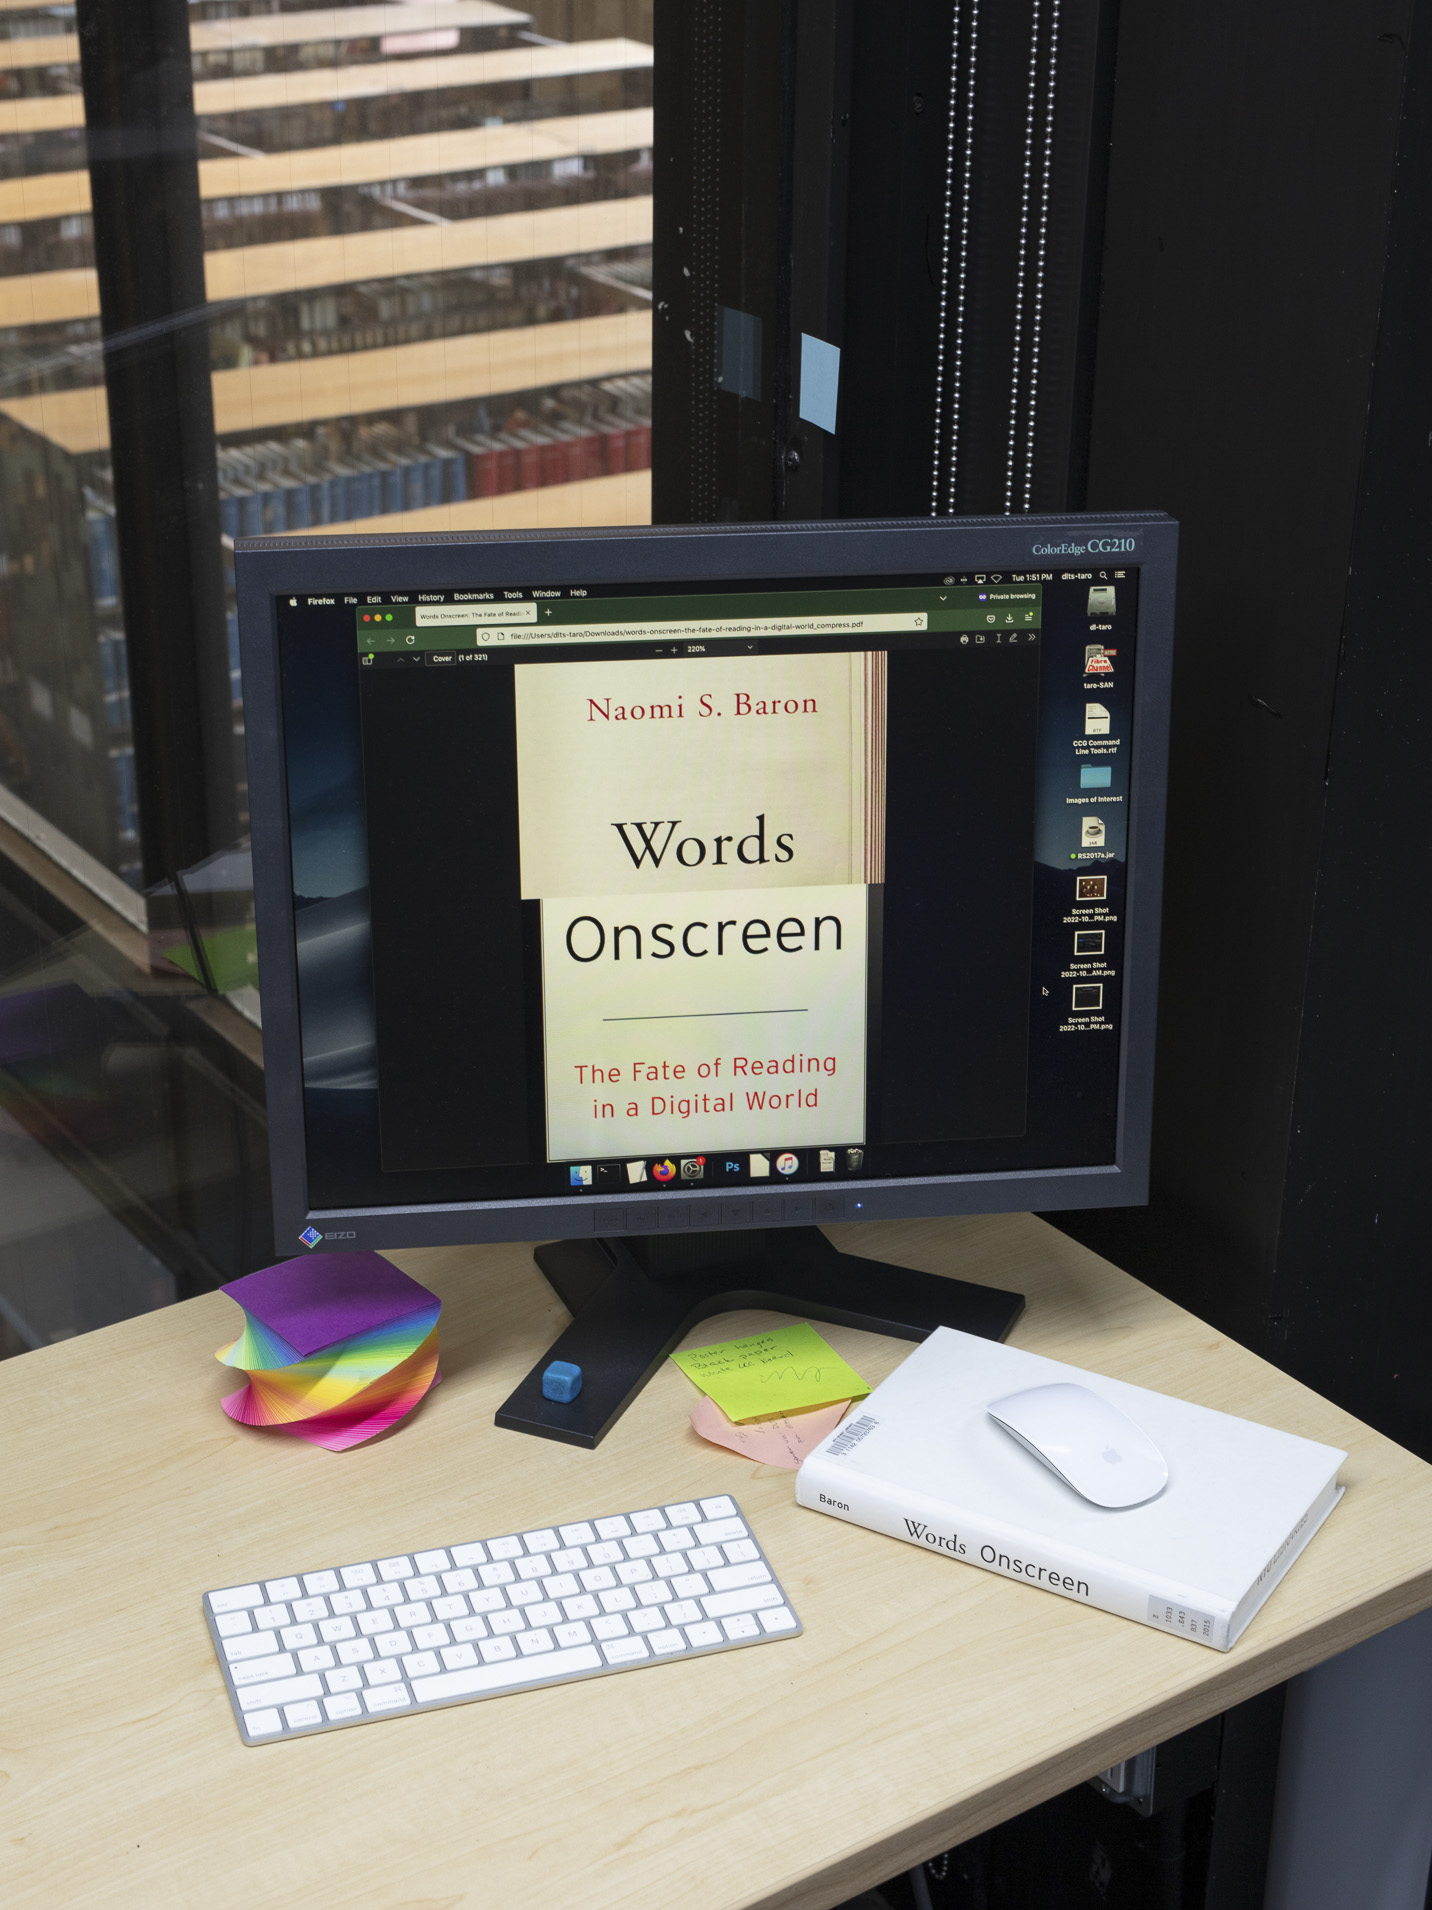 Words displayed on a computer screen which is resting on a desk